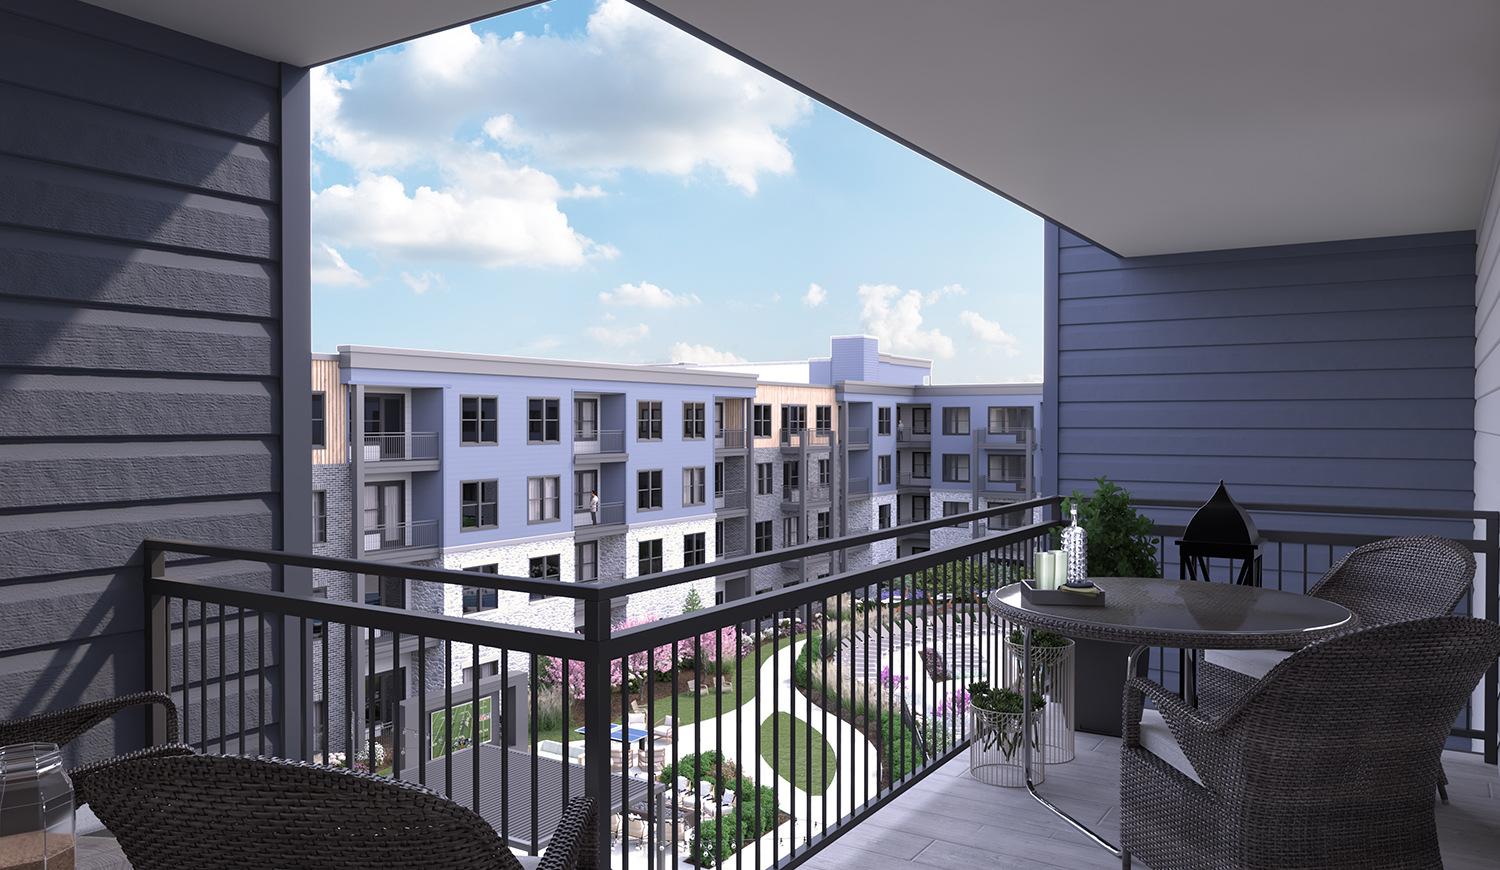 Atlee Square luxury apartment balcony in Langhorne, PA, showcasing the modern design and view of the outside apartments.